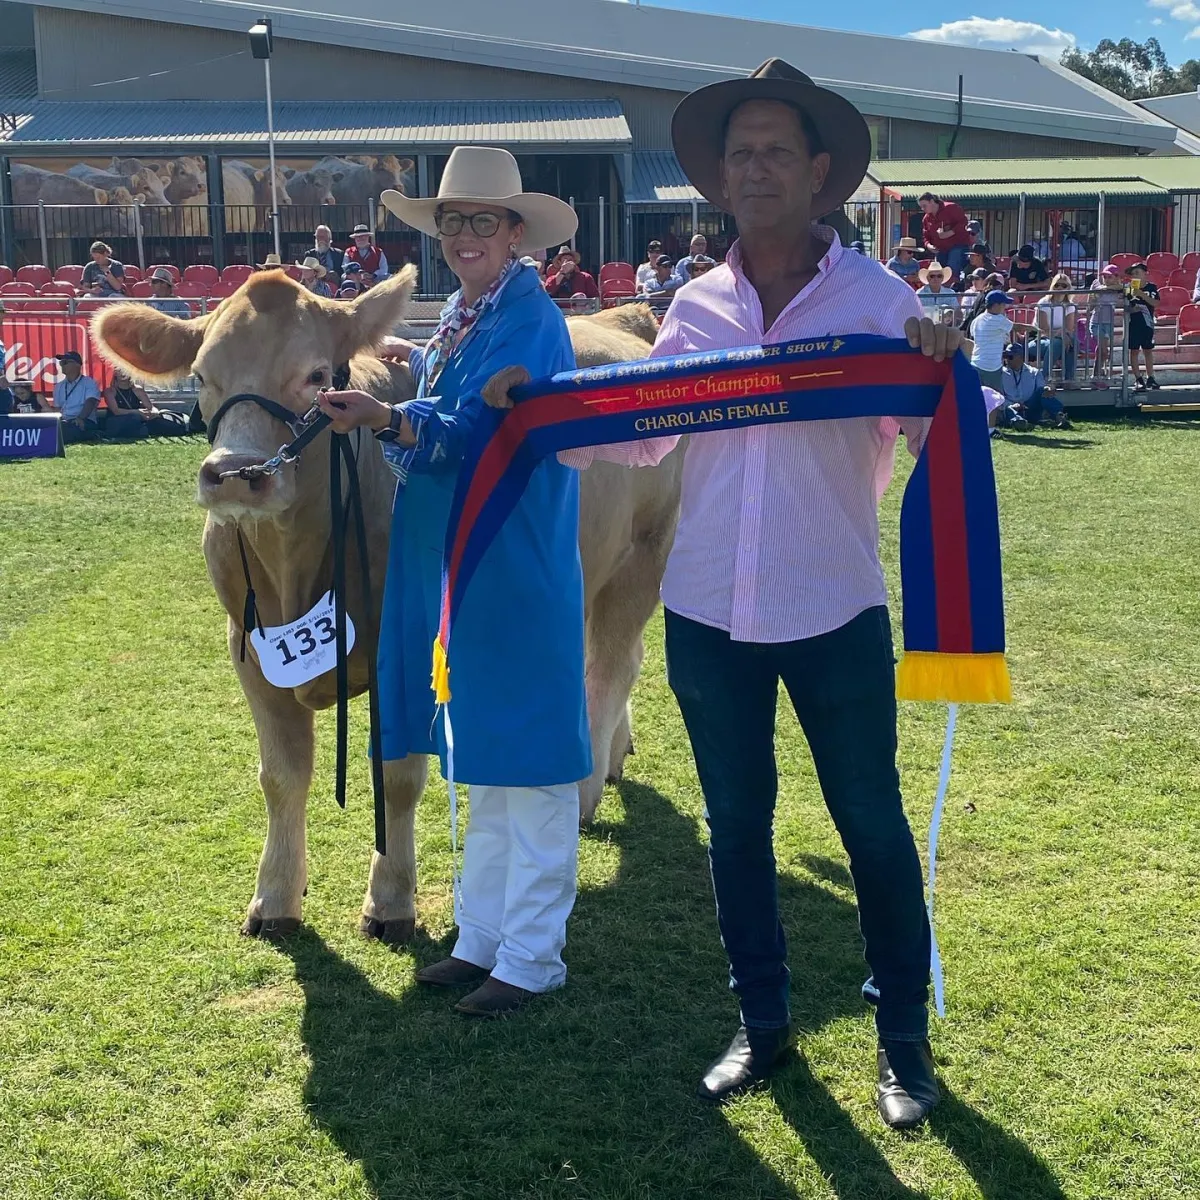 Greg Nicholson, owner of Black Duck Charolais, proudly displaying a 'Junior Champion Charolais Female' ribbon at a sunny outdoor cattle show, alongside a prize-winning Charolais heifer held by a smiling handler in blue.